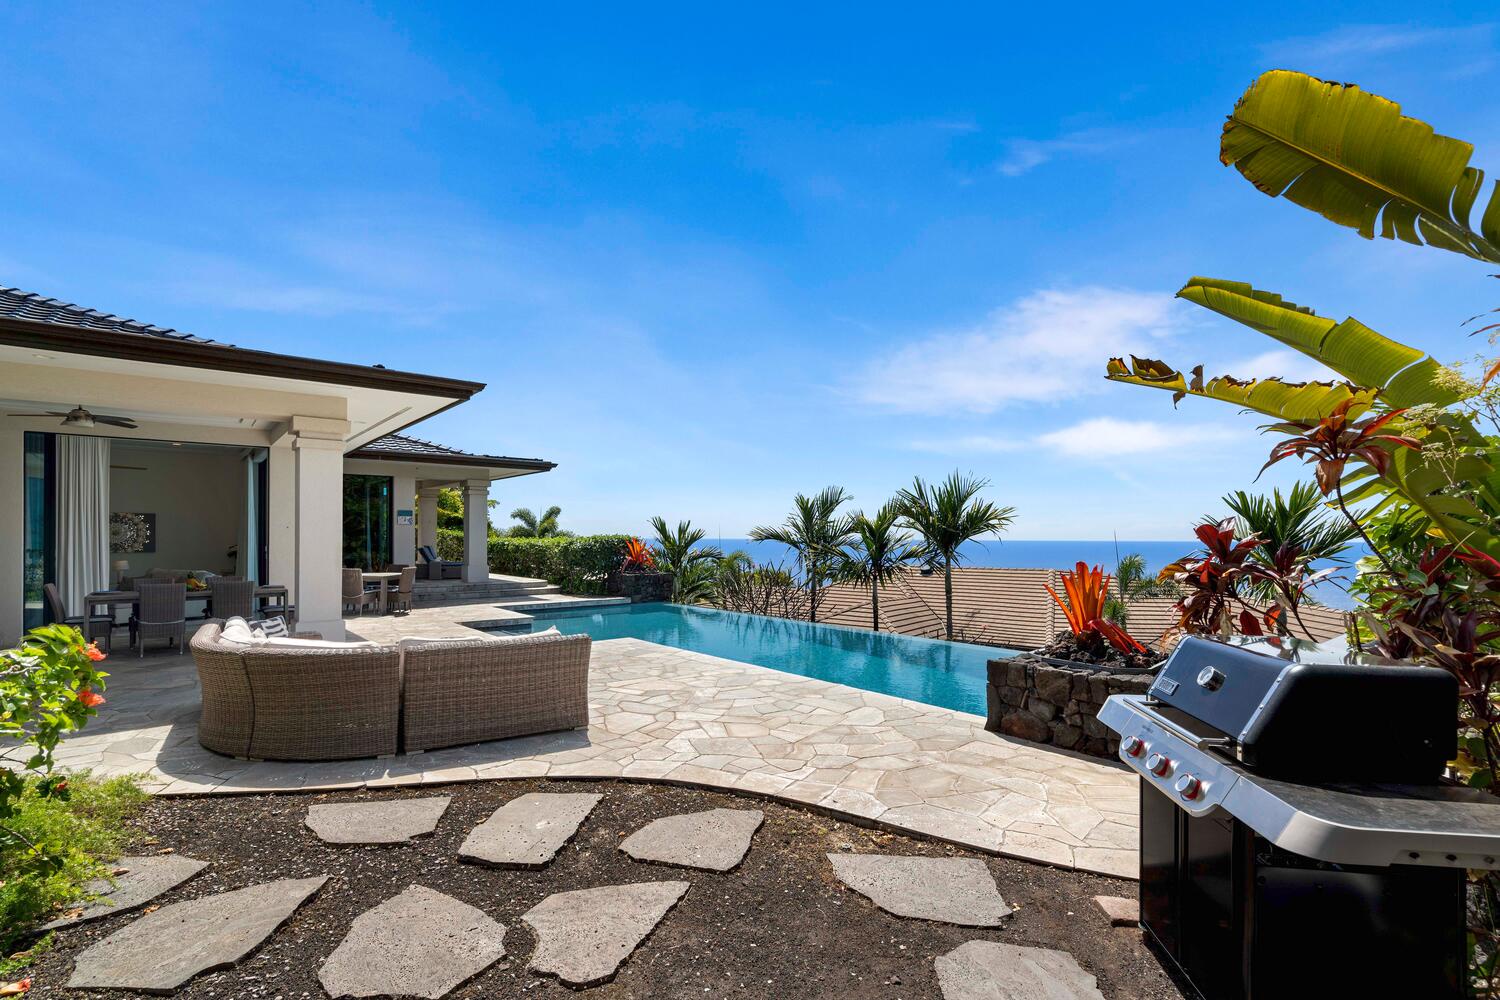 Kailua Kona Vacation Rentals, Blue Hawaii - Gourmet BBQ with all the bells and whistles!